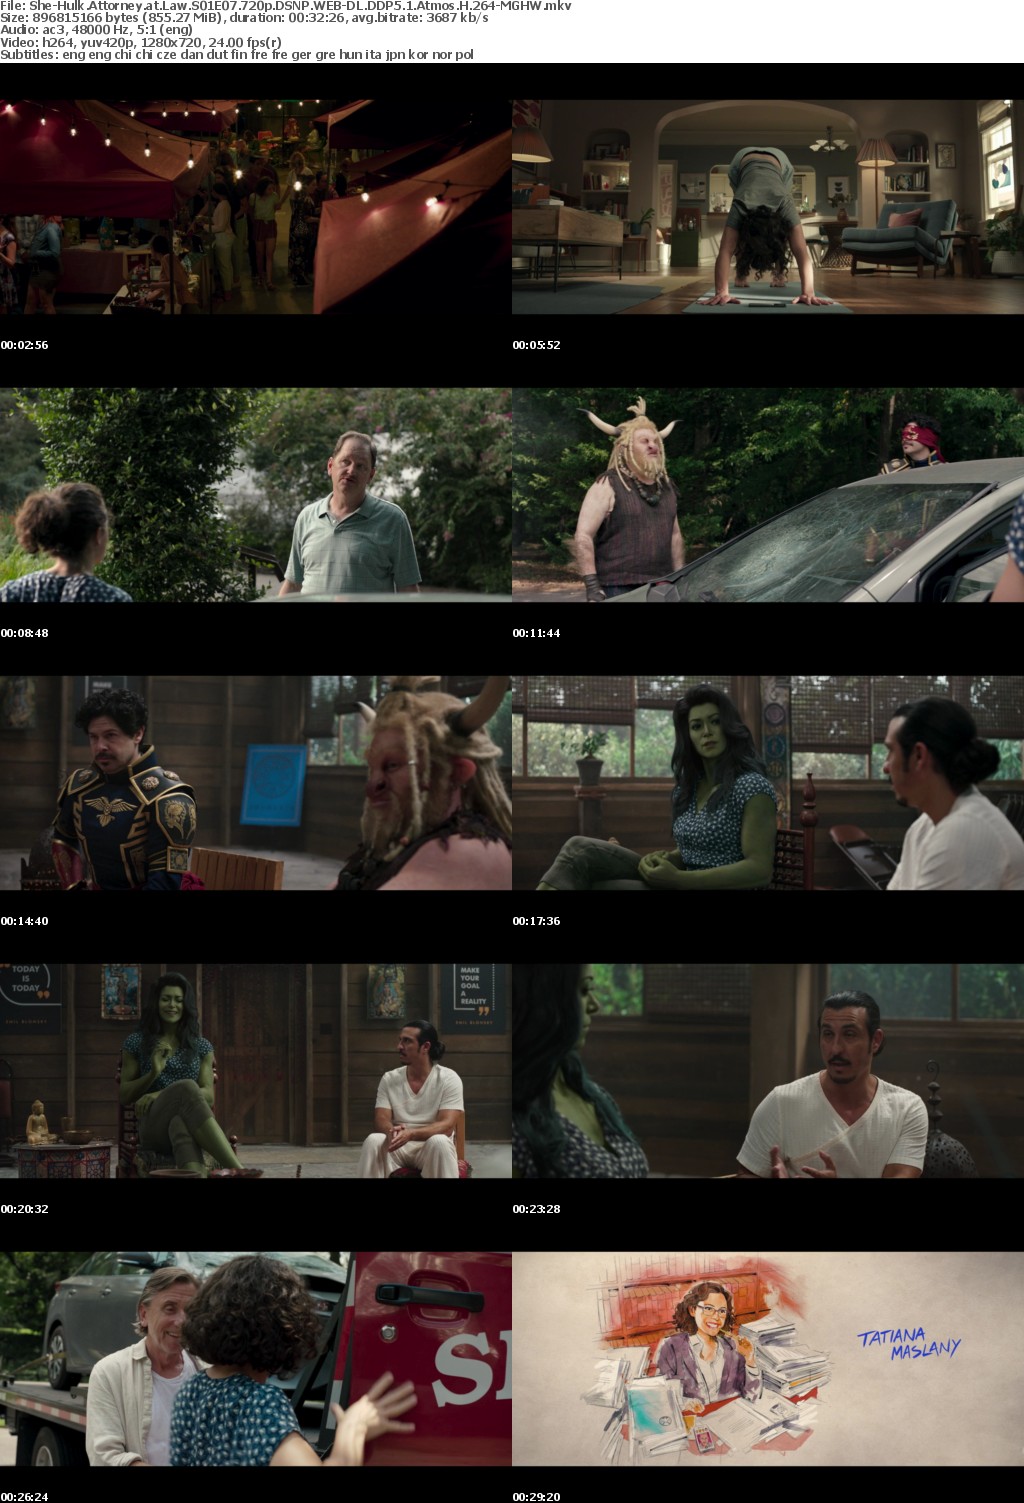 She-Hulk Attorney at Law S01E07 720p DSNP WEB-DL DDP5 1 Atmos H 264-MGHW